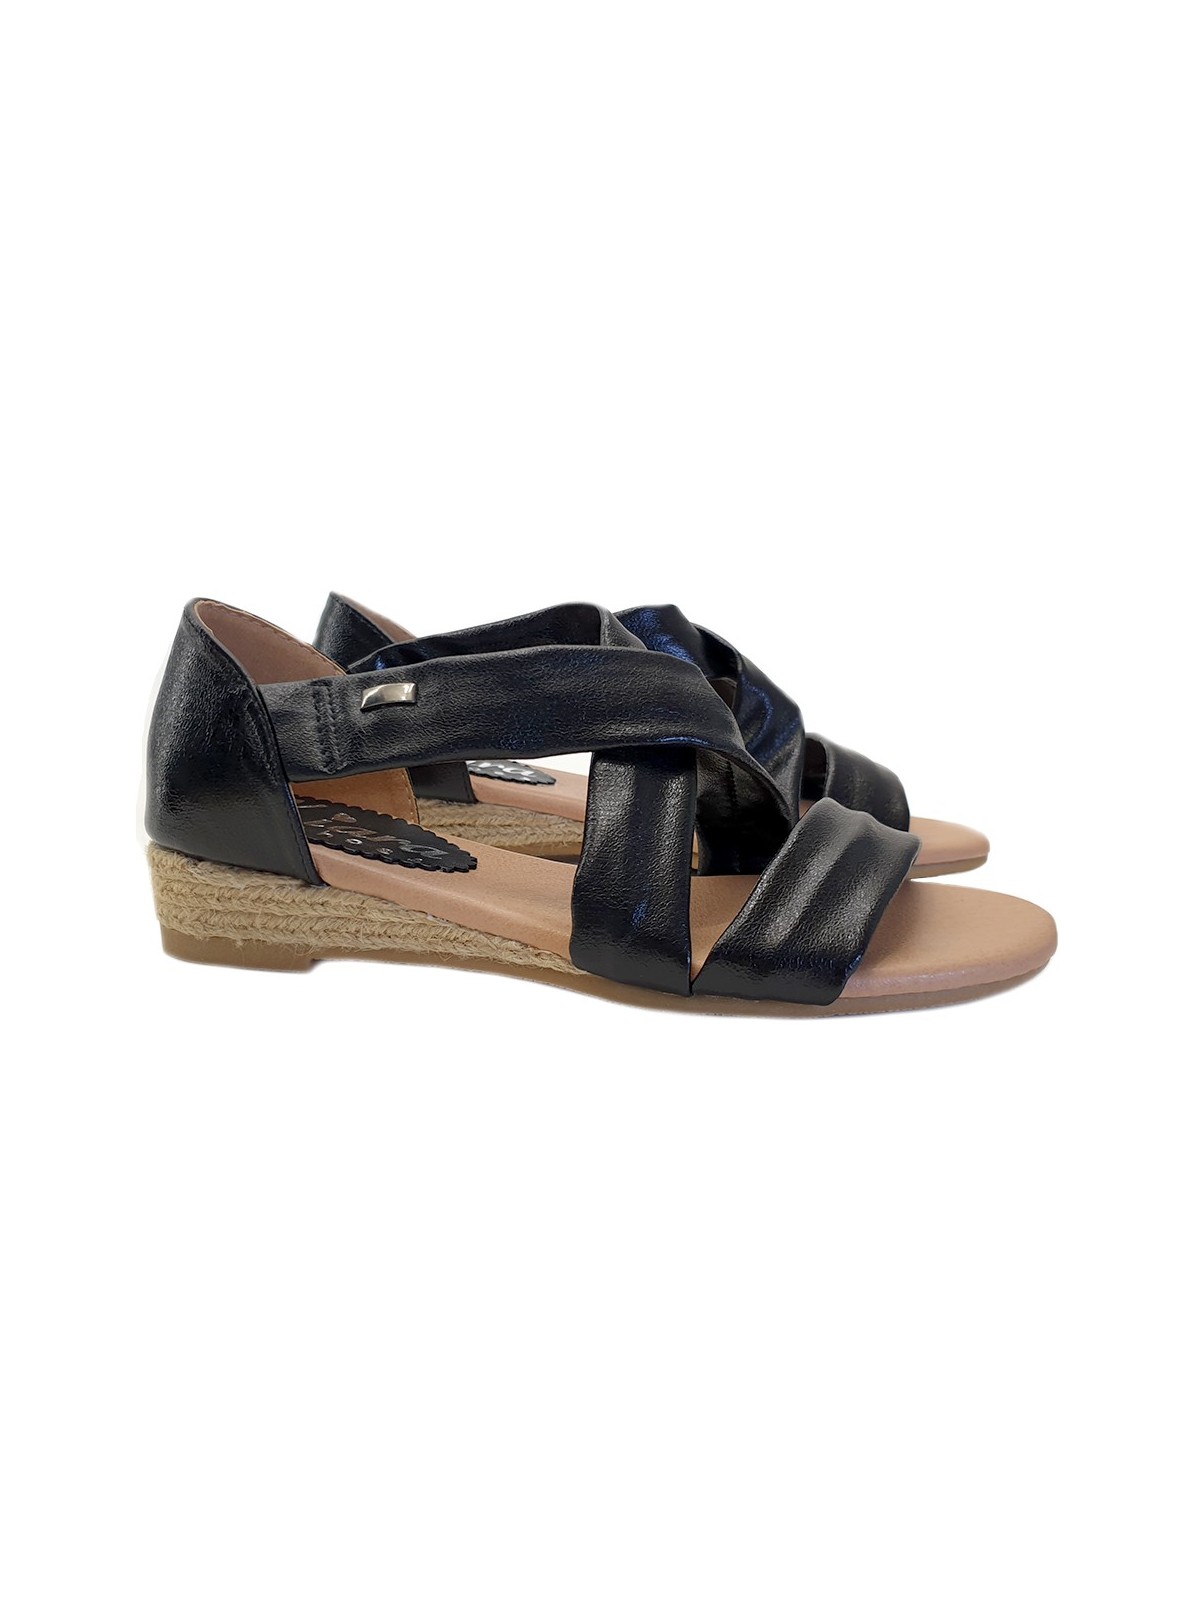 WOMAN'S SANDALS WITH FAUX LEATHER BAND